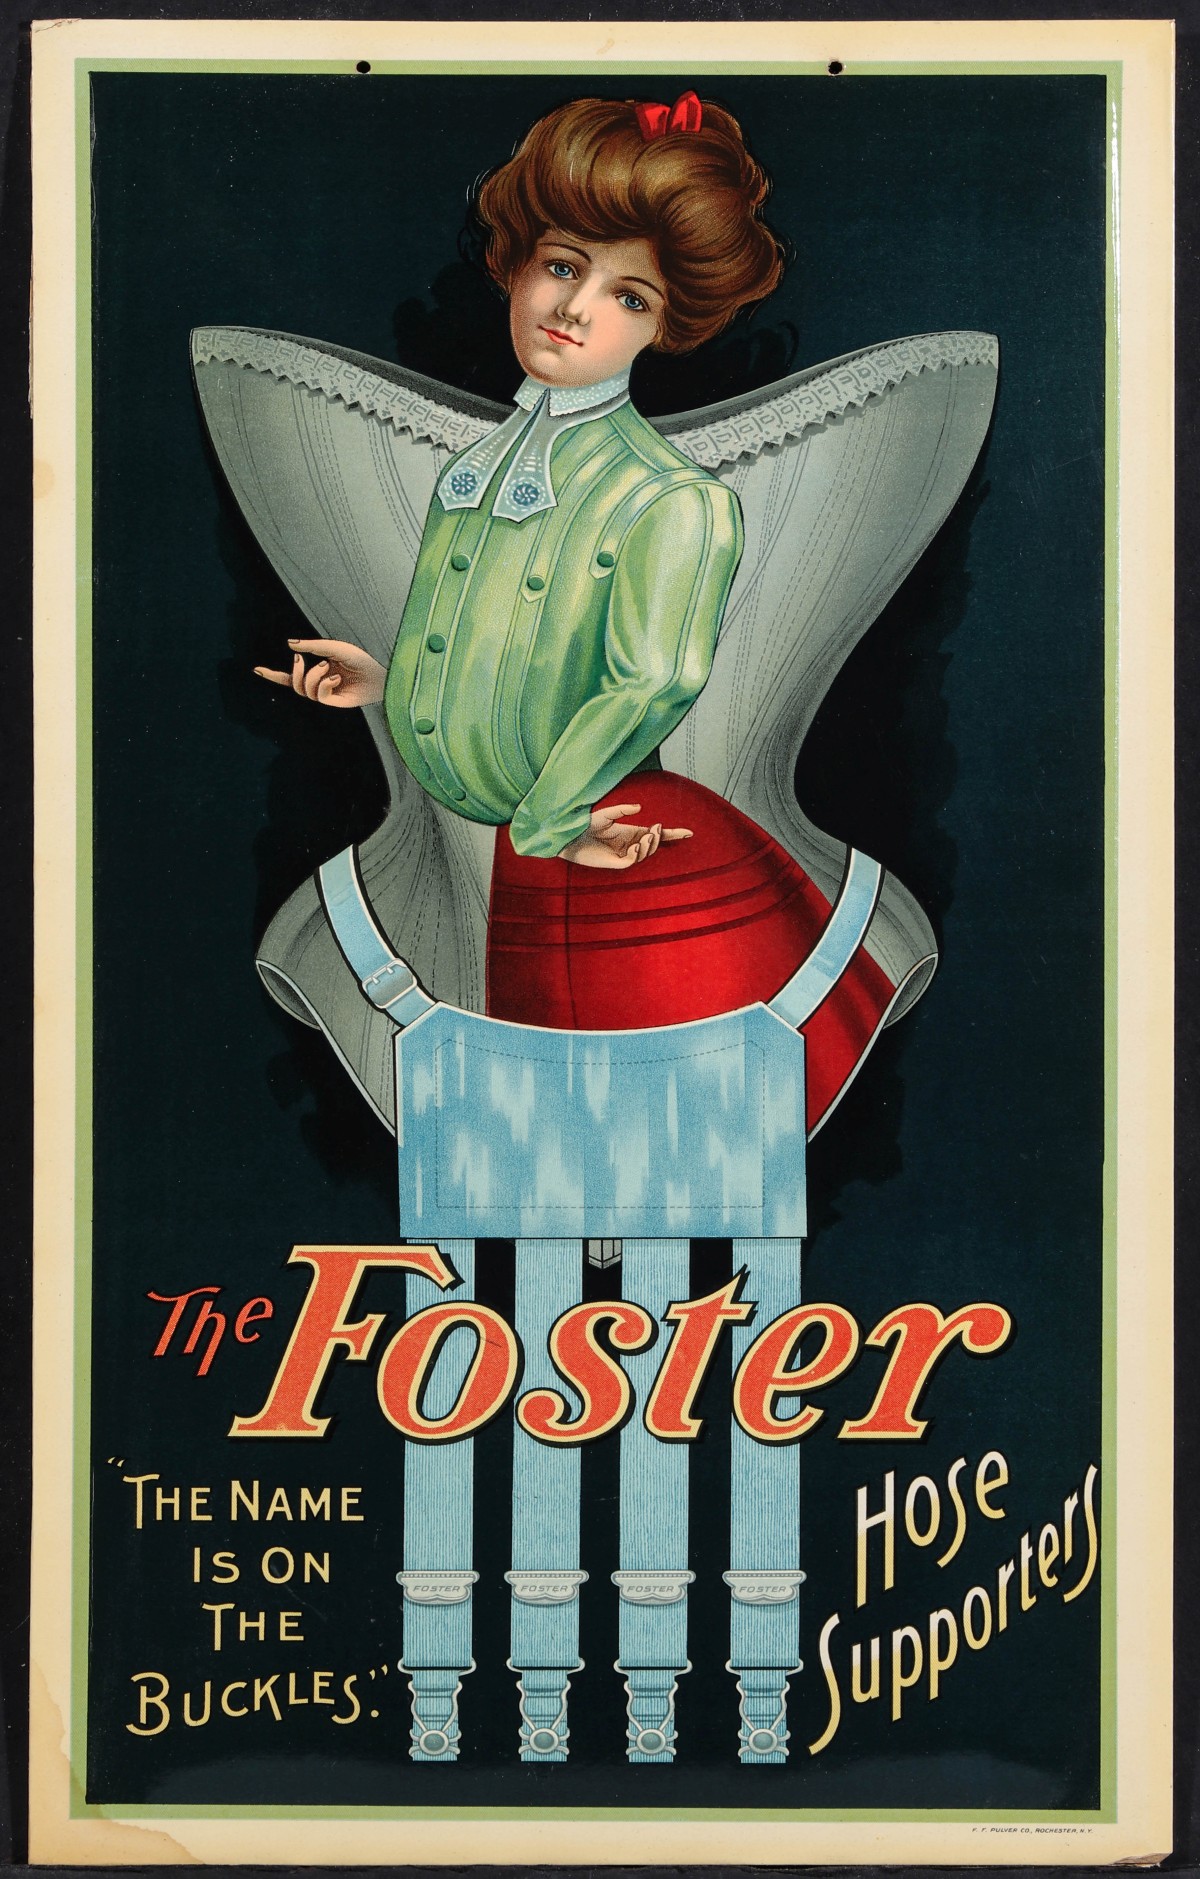 A BRIGHT, CRISP CELLULOID SIGN FOR FOSTER HOSE SUPPOTER